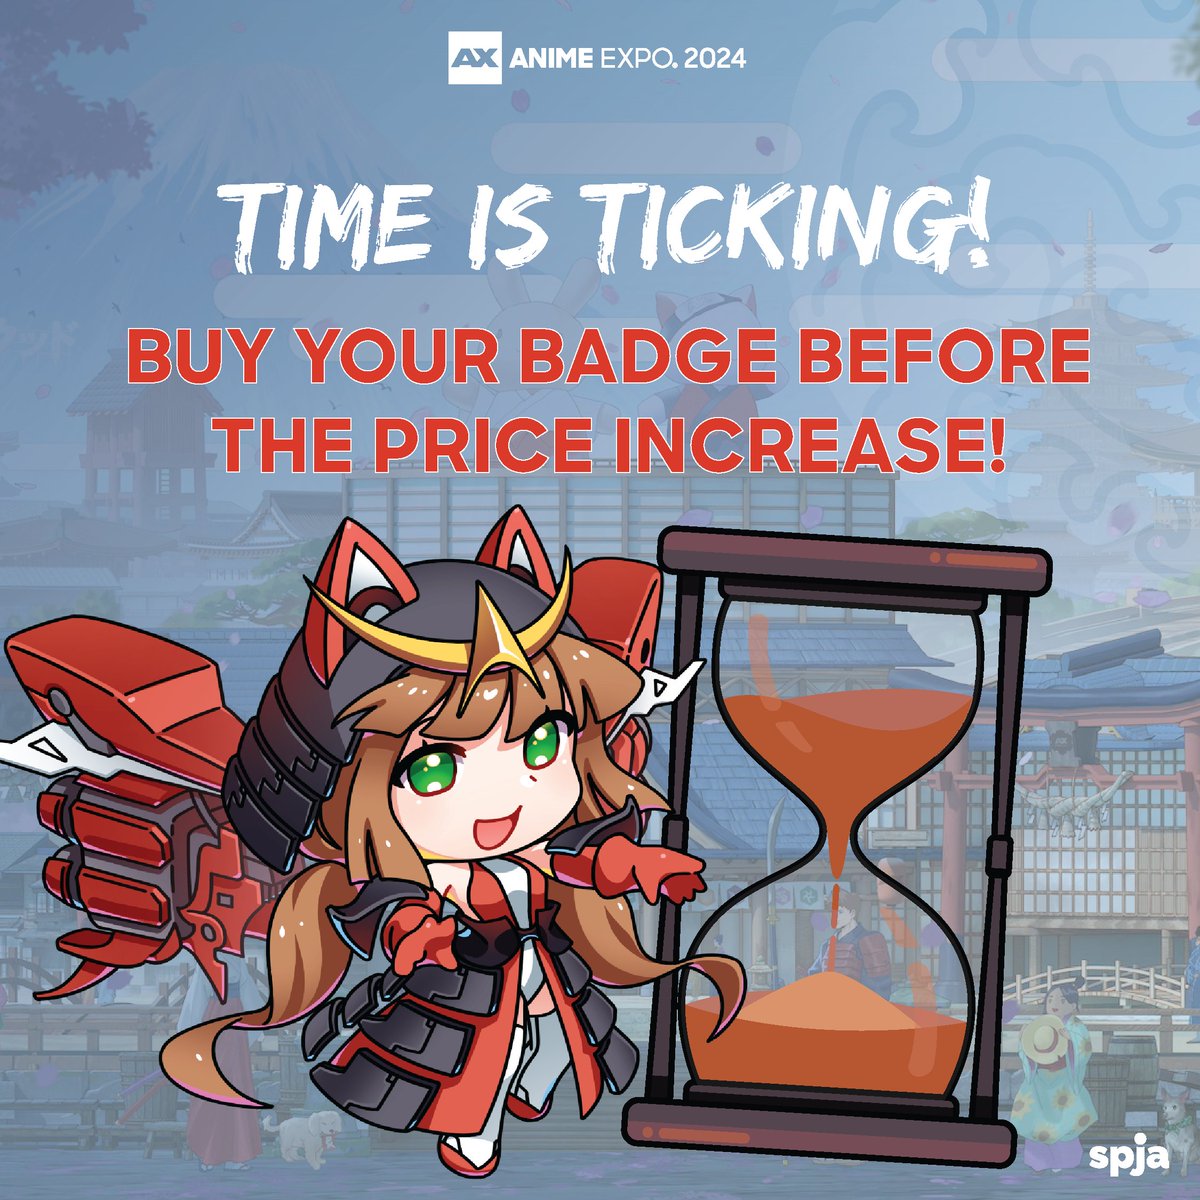 ⏳ The clock’s ticking down on the current badge prices for #AX2024. Save $$$ on your badge now before it's too late!! ⏰ 🎟️ Buy Your Badge Now!: bit.ly/4bcTcYQ 🏨 Book Your Hotel Now!: bit.ly/3OgCDkG